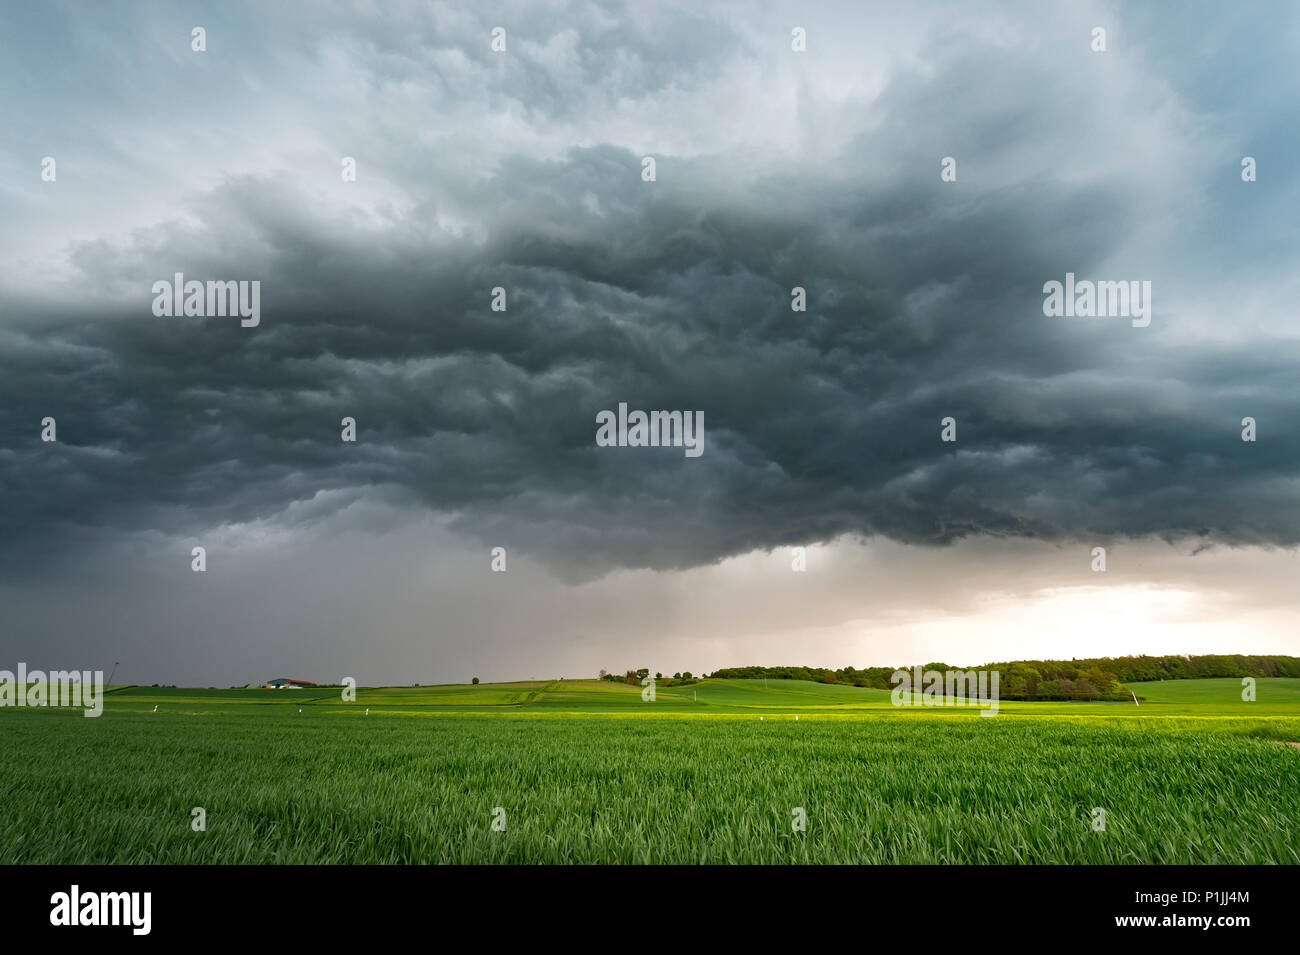 Turbulent clouds (whale's mouth) under a shelfcloud near Lich, central Hessia, Germany Stock Photo